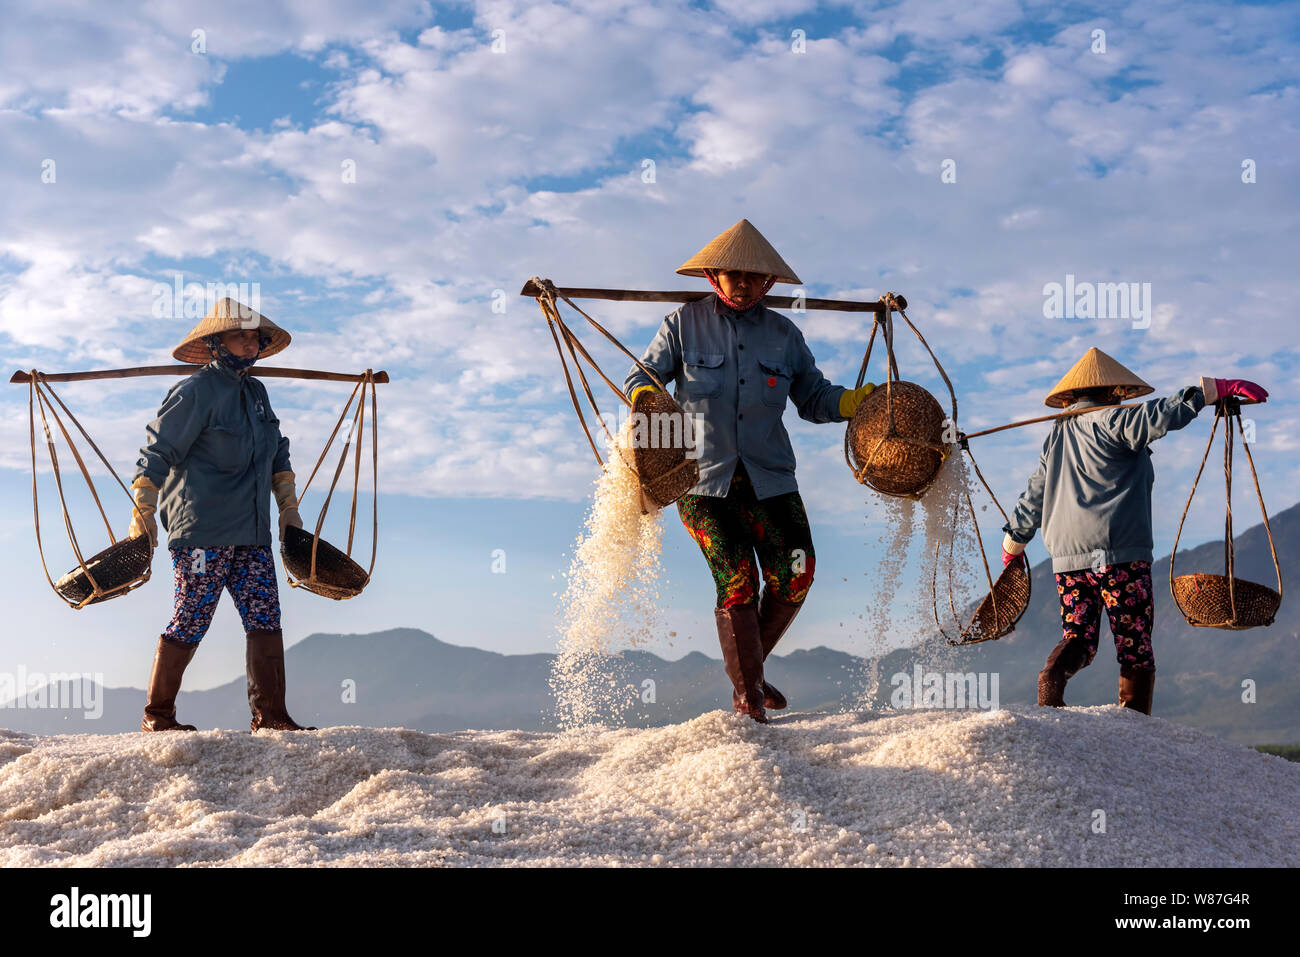 Woman workers pouring freshly harvested salt from baskets to the salt pile at sunrise in Hon Khoi salt field, Nha Trang Province, Vietnam Stock Photo